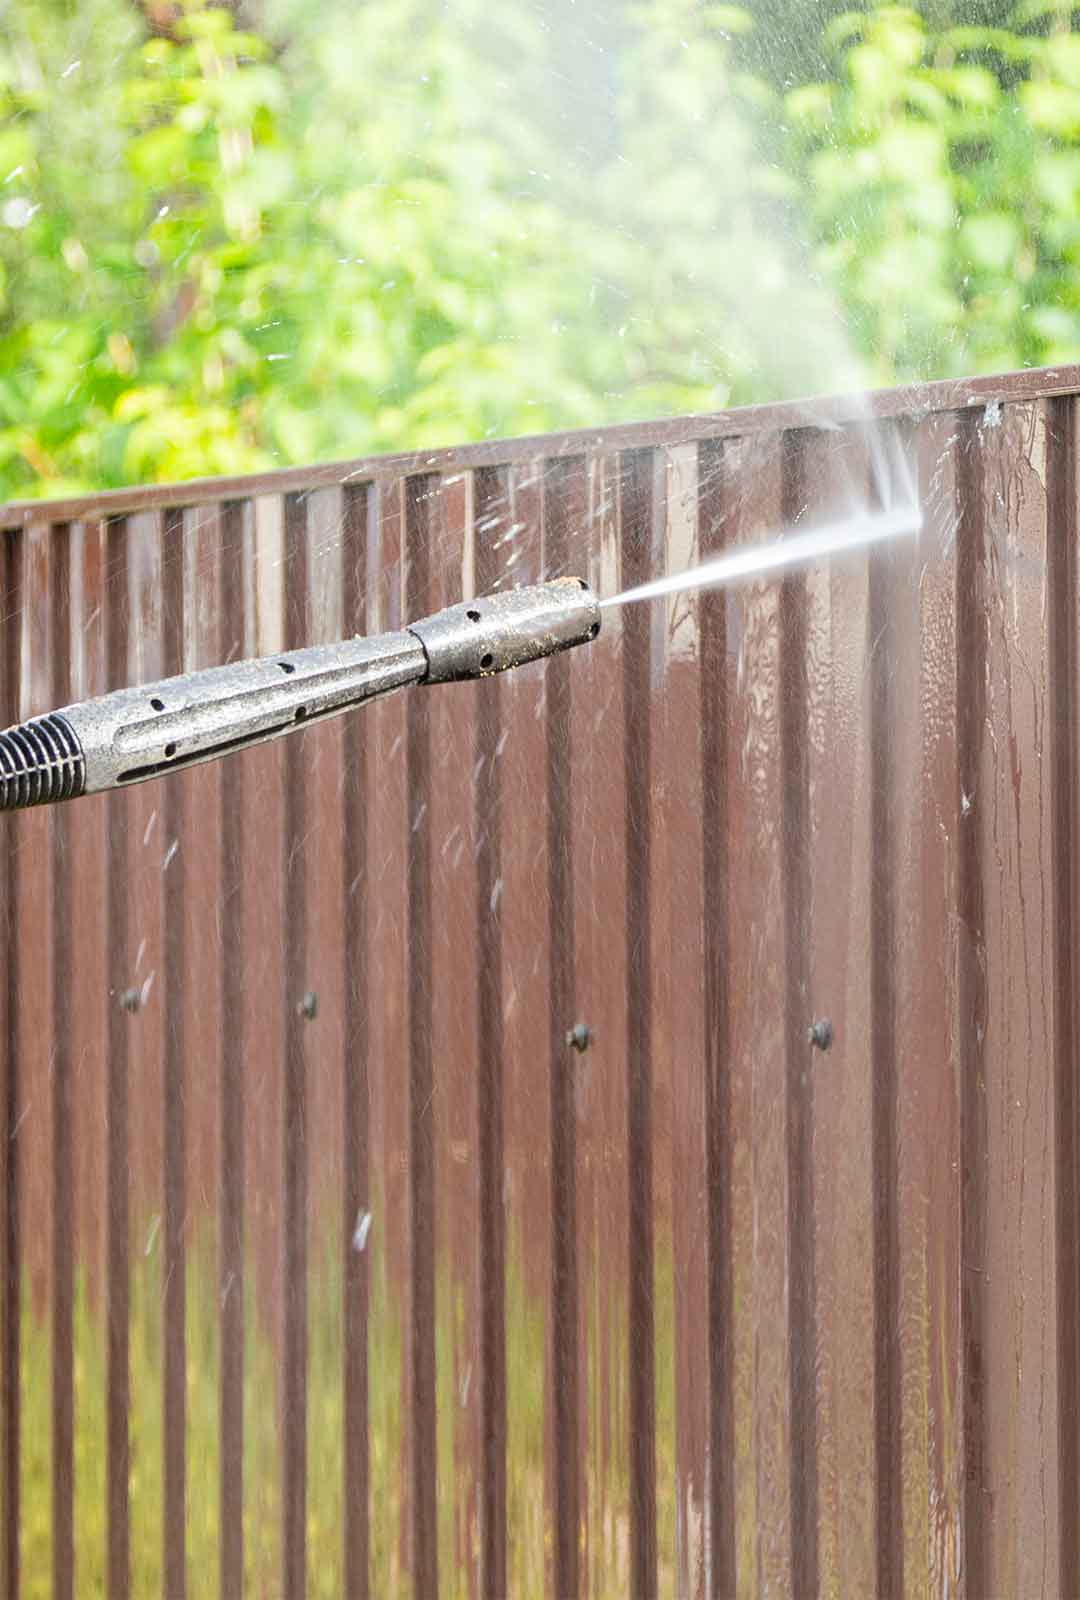 Fence Cleaning services - jet washing fences